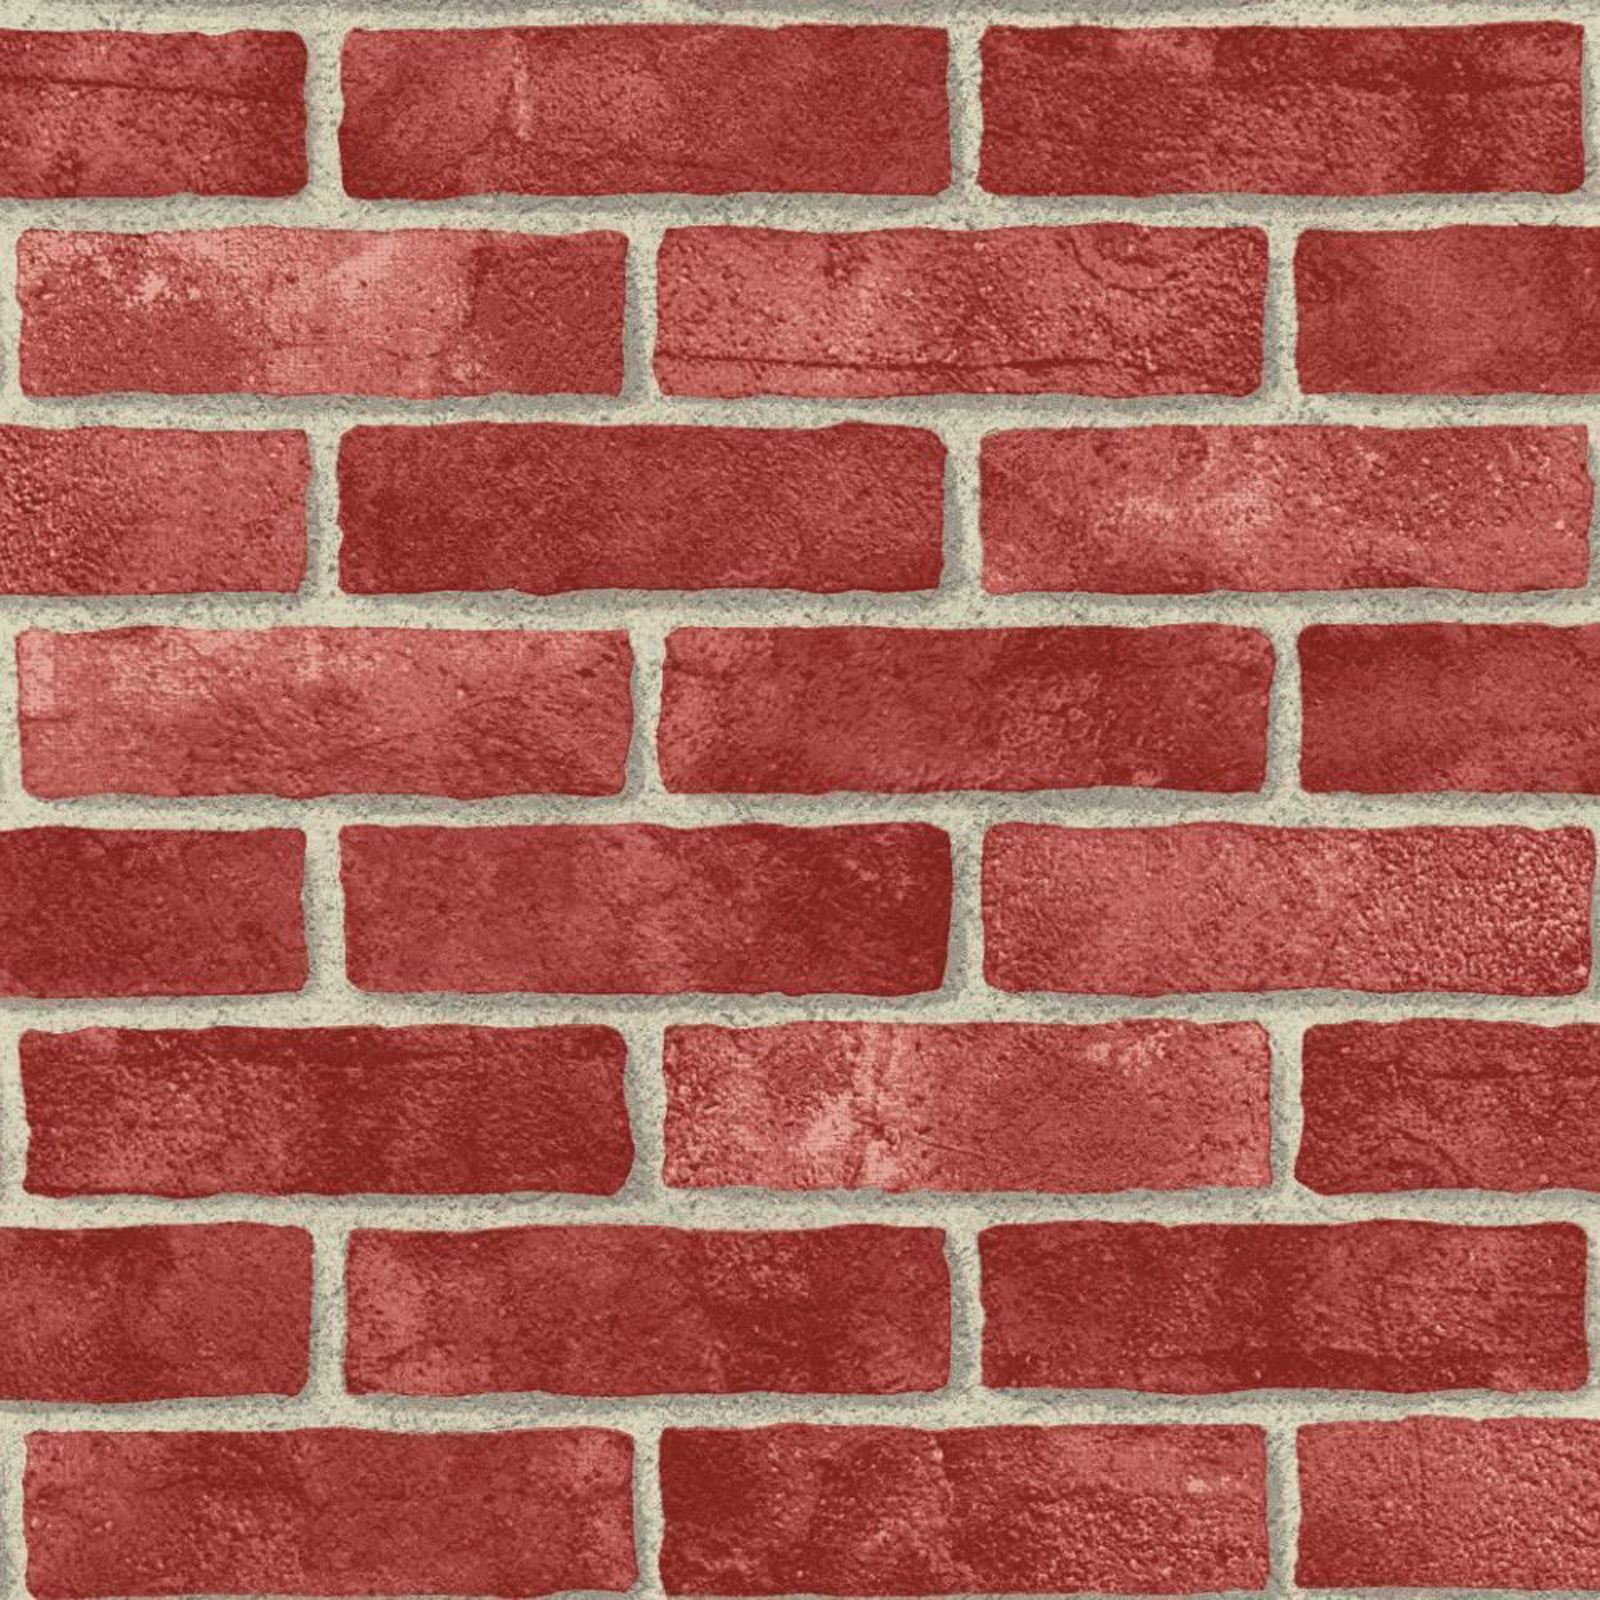 Details About Red Brick Wallpaper Arthouse Vip New